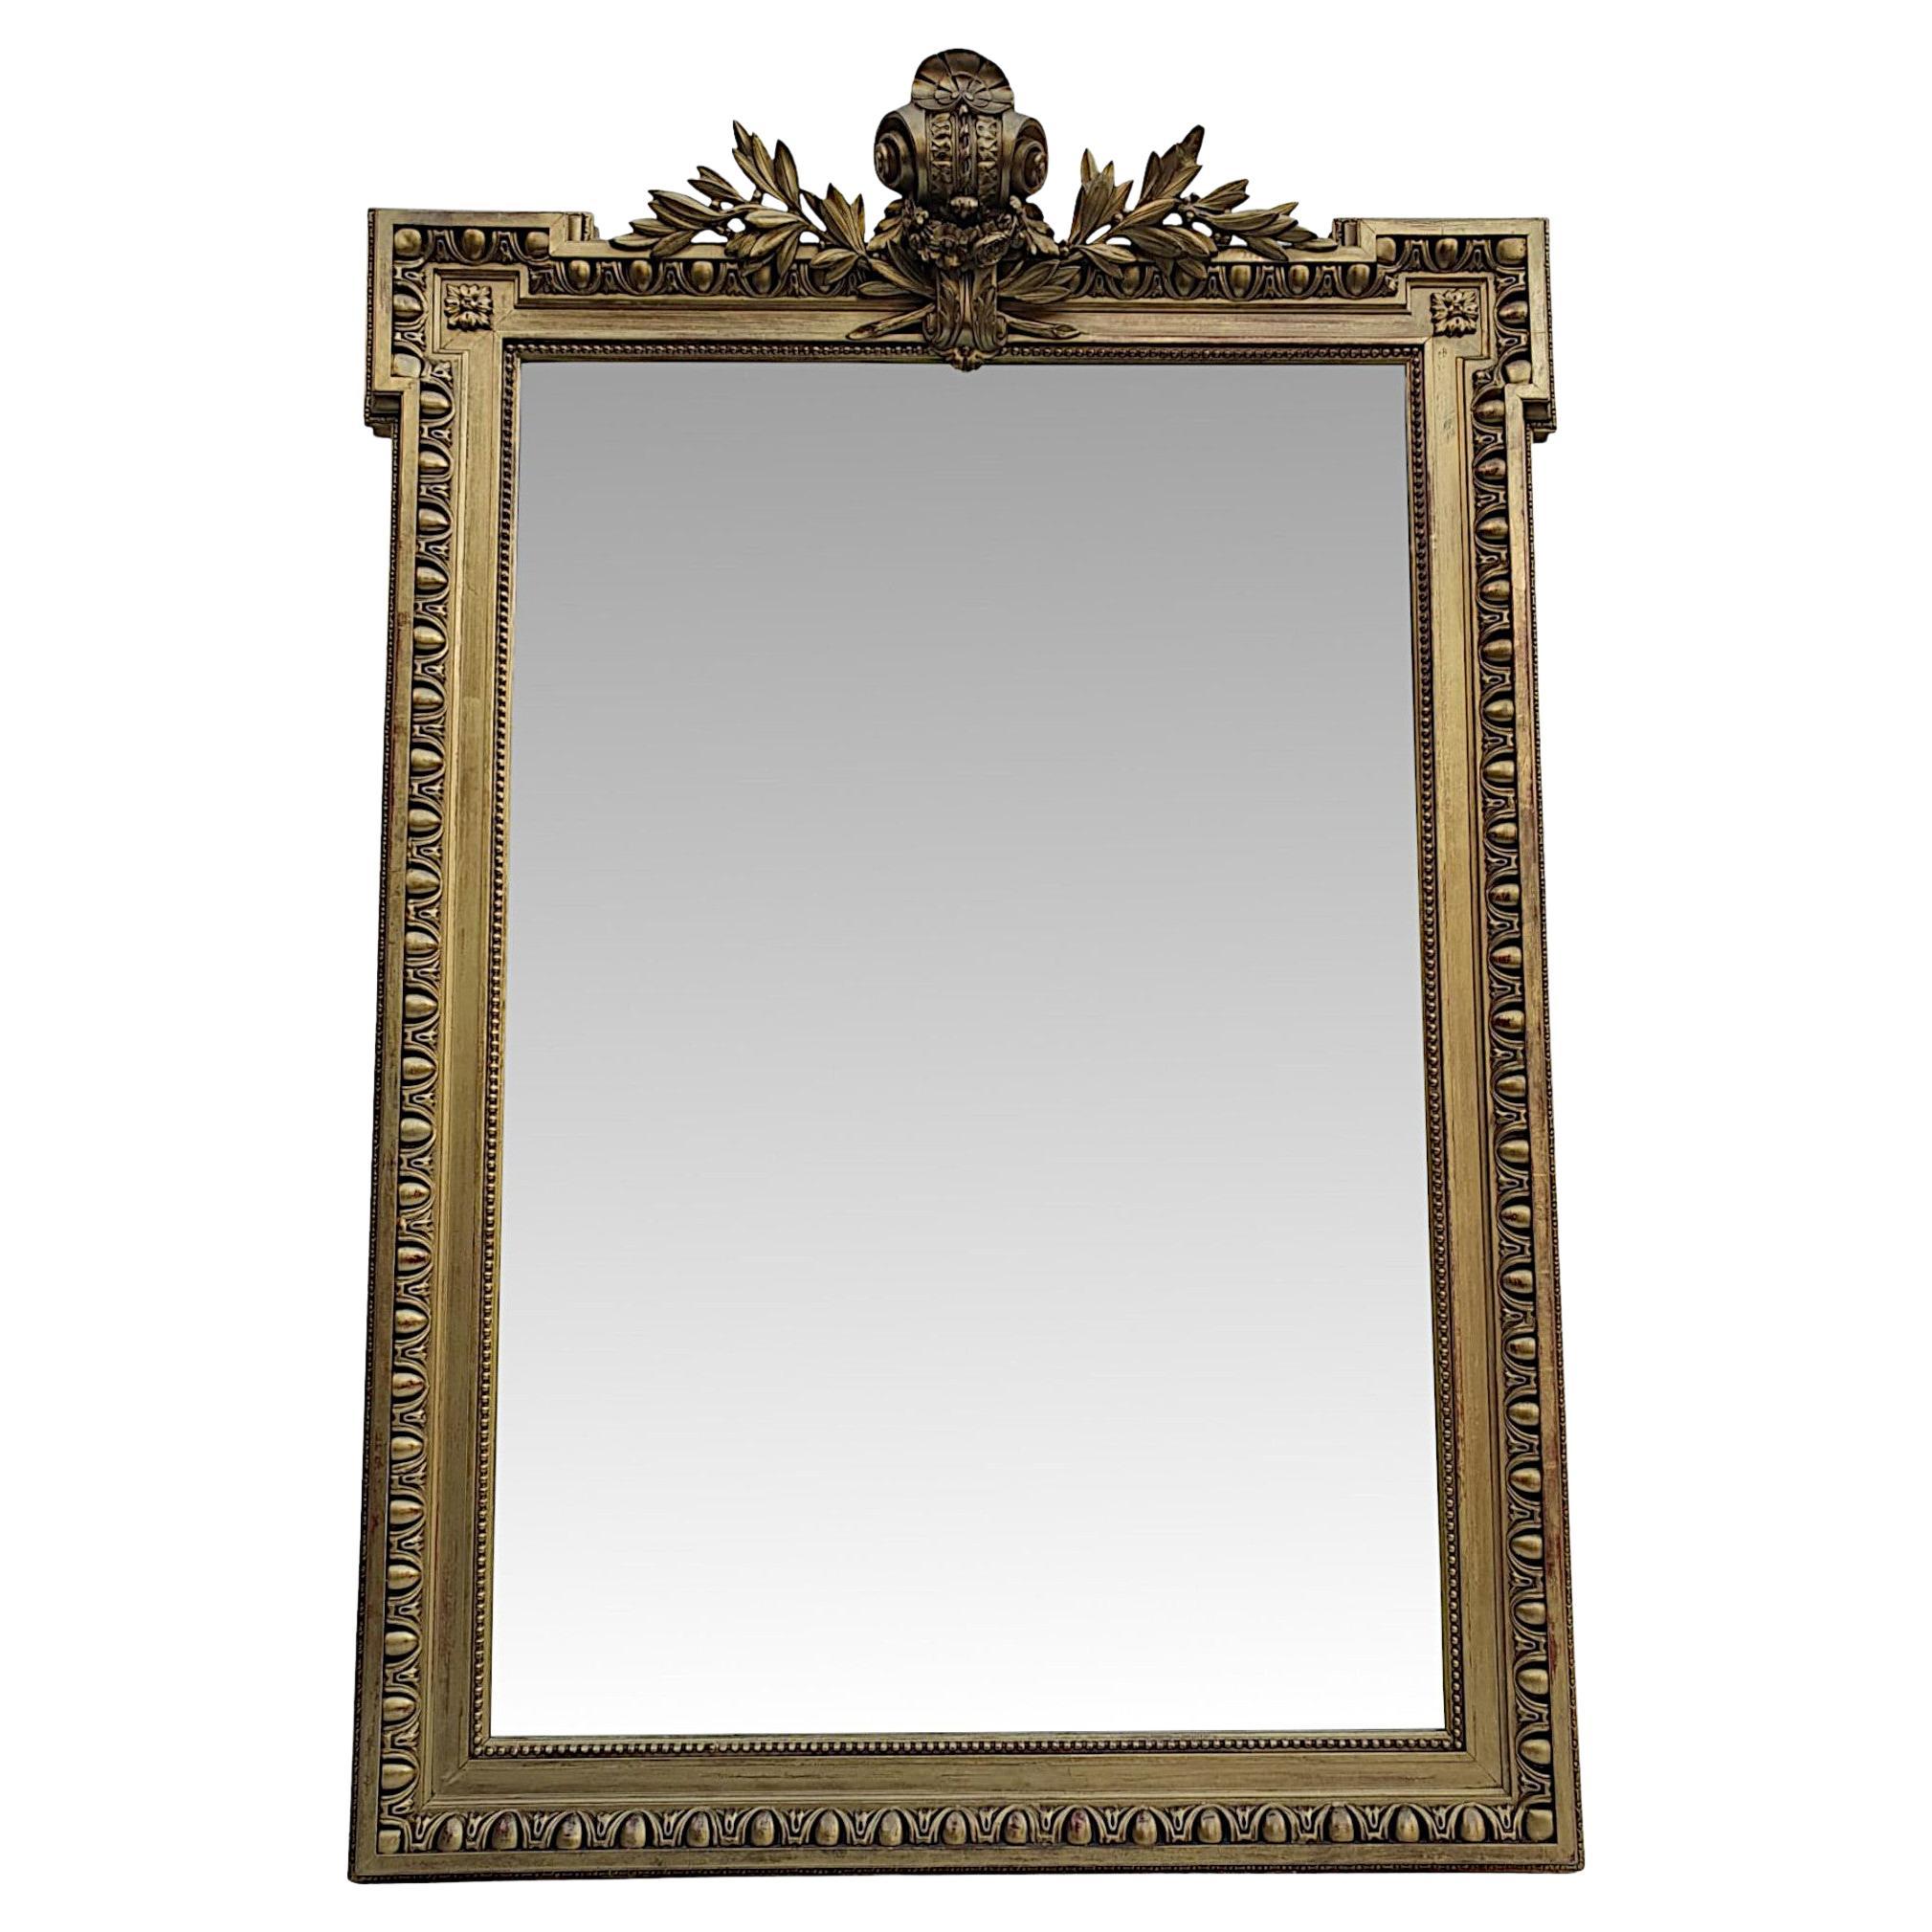 Fabulous 19th Century Giltwood Hall or Overmantle Mirror